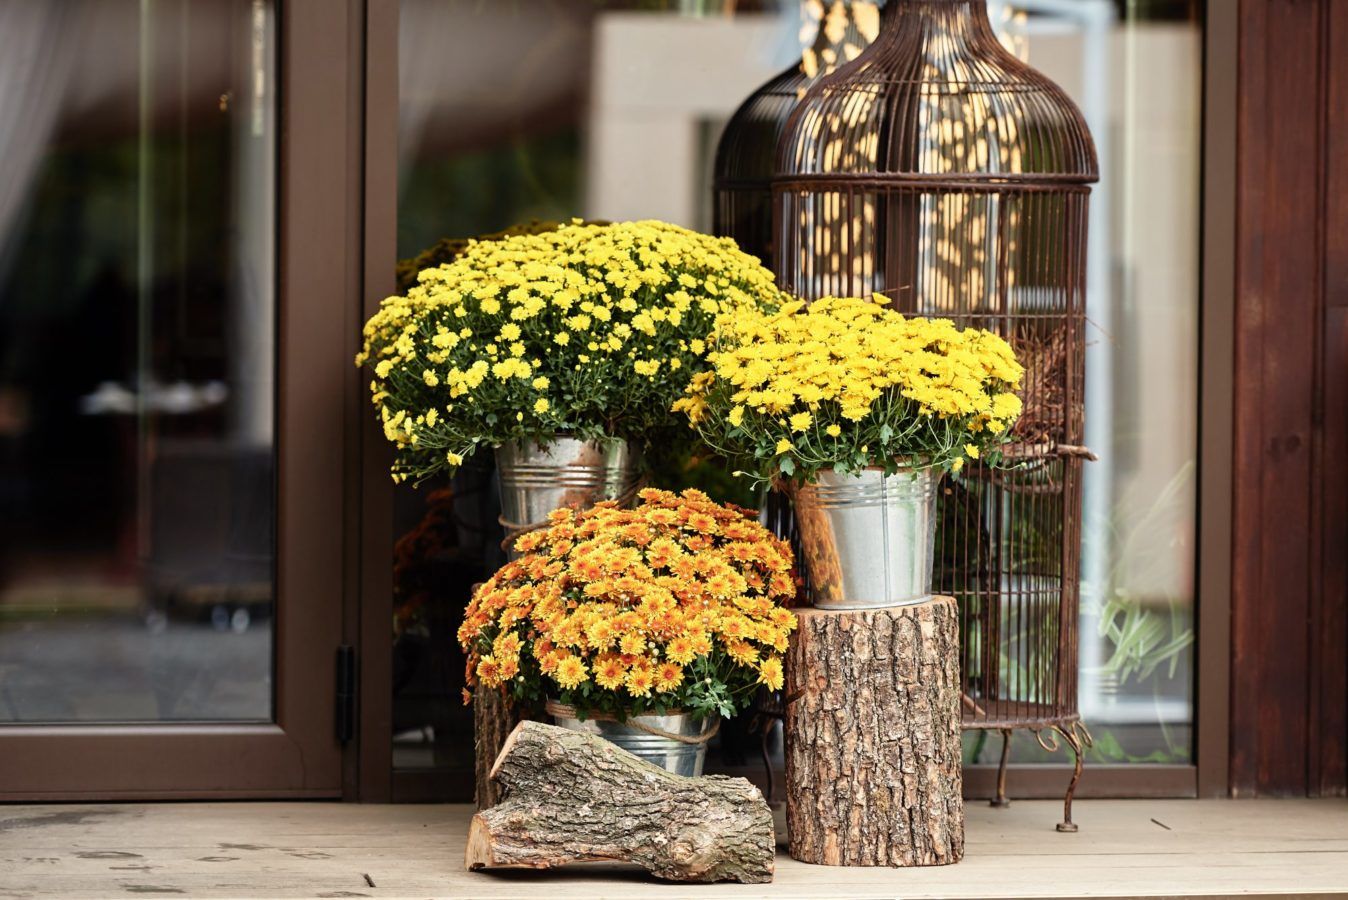 How to put together a show-stopping fall planter